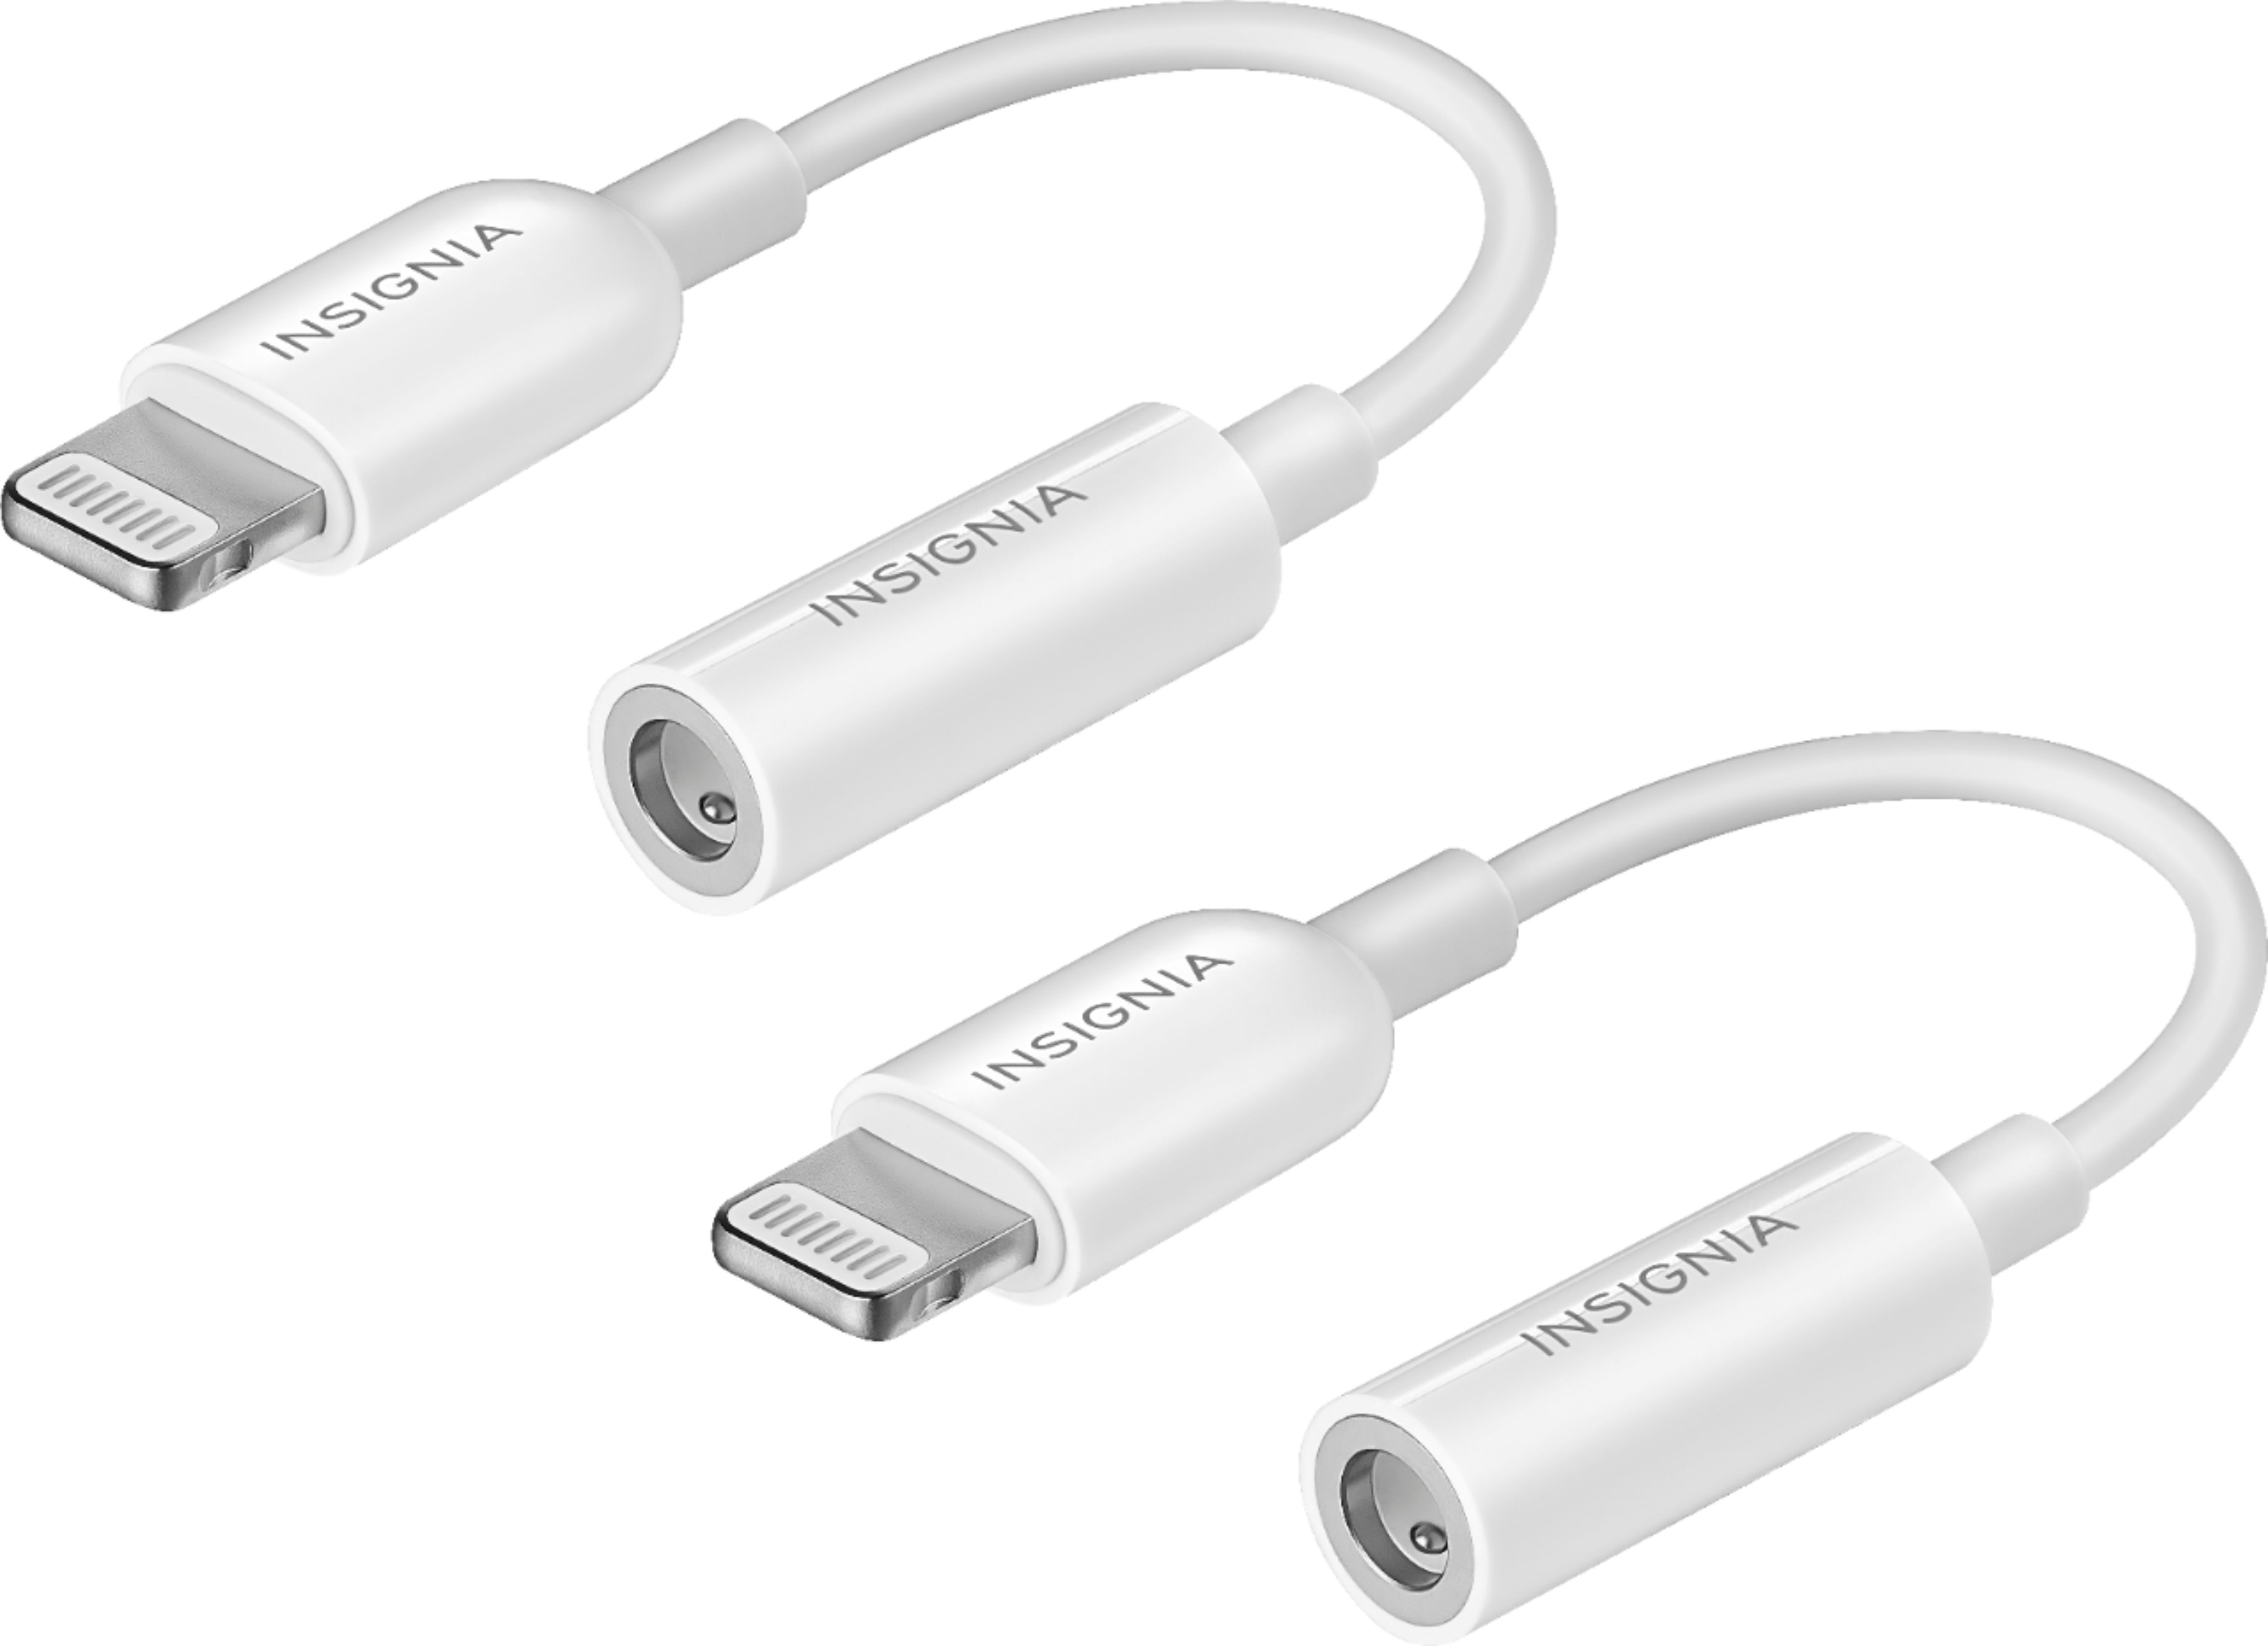 Best Buy Insignia Lightning To 3 5mm Headphone Adapter 2 Pack White Ns Ma35a5tw